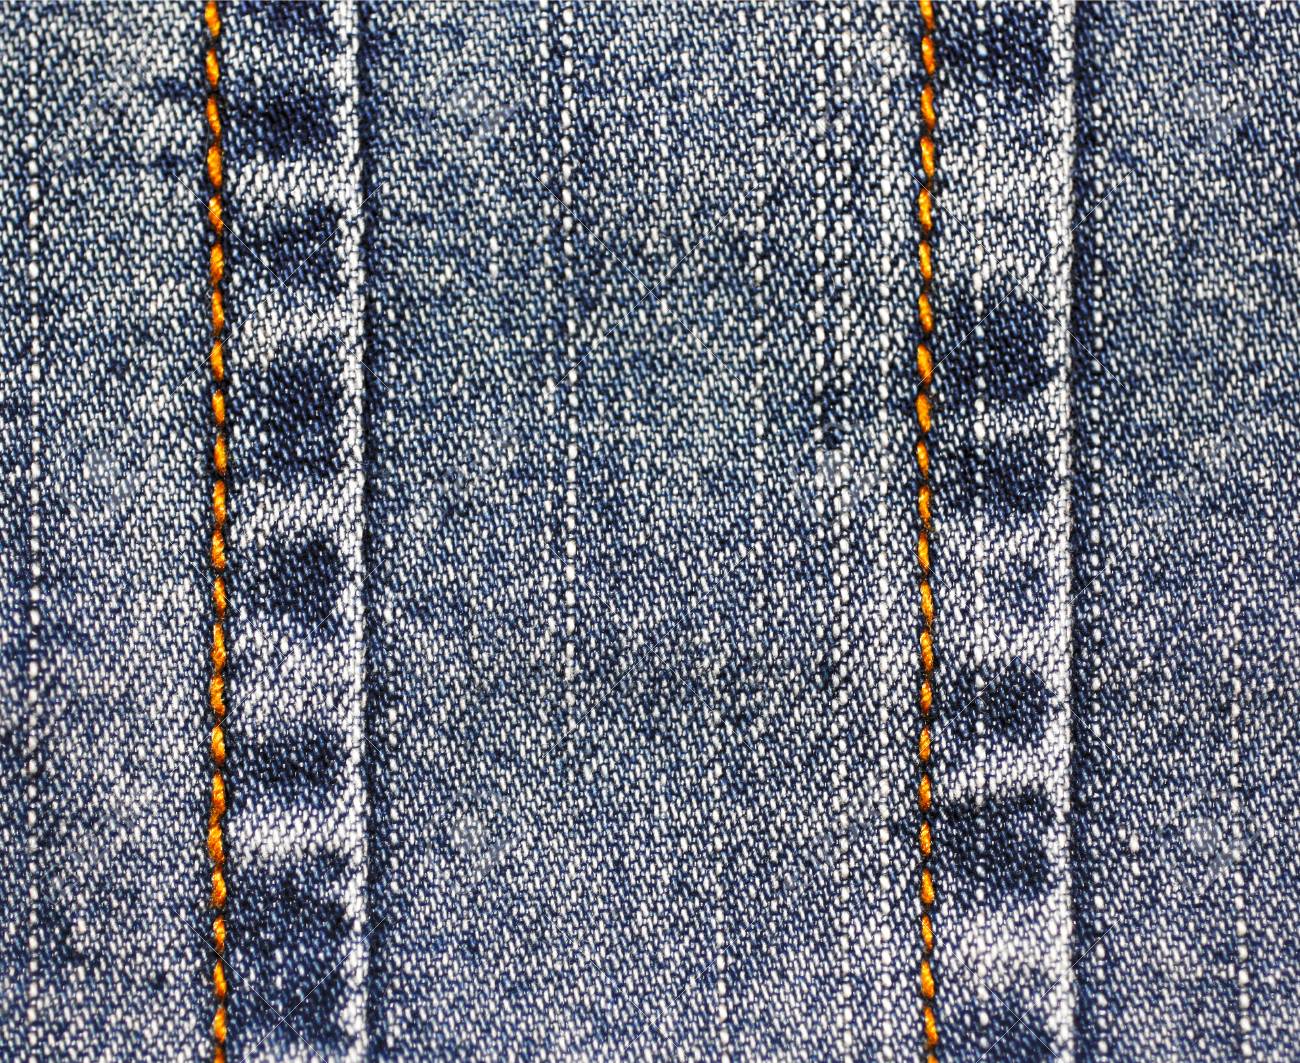 Free download Background Of Denim Fabric With Seams Blue Jeans Cloth ...